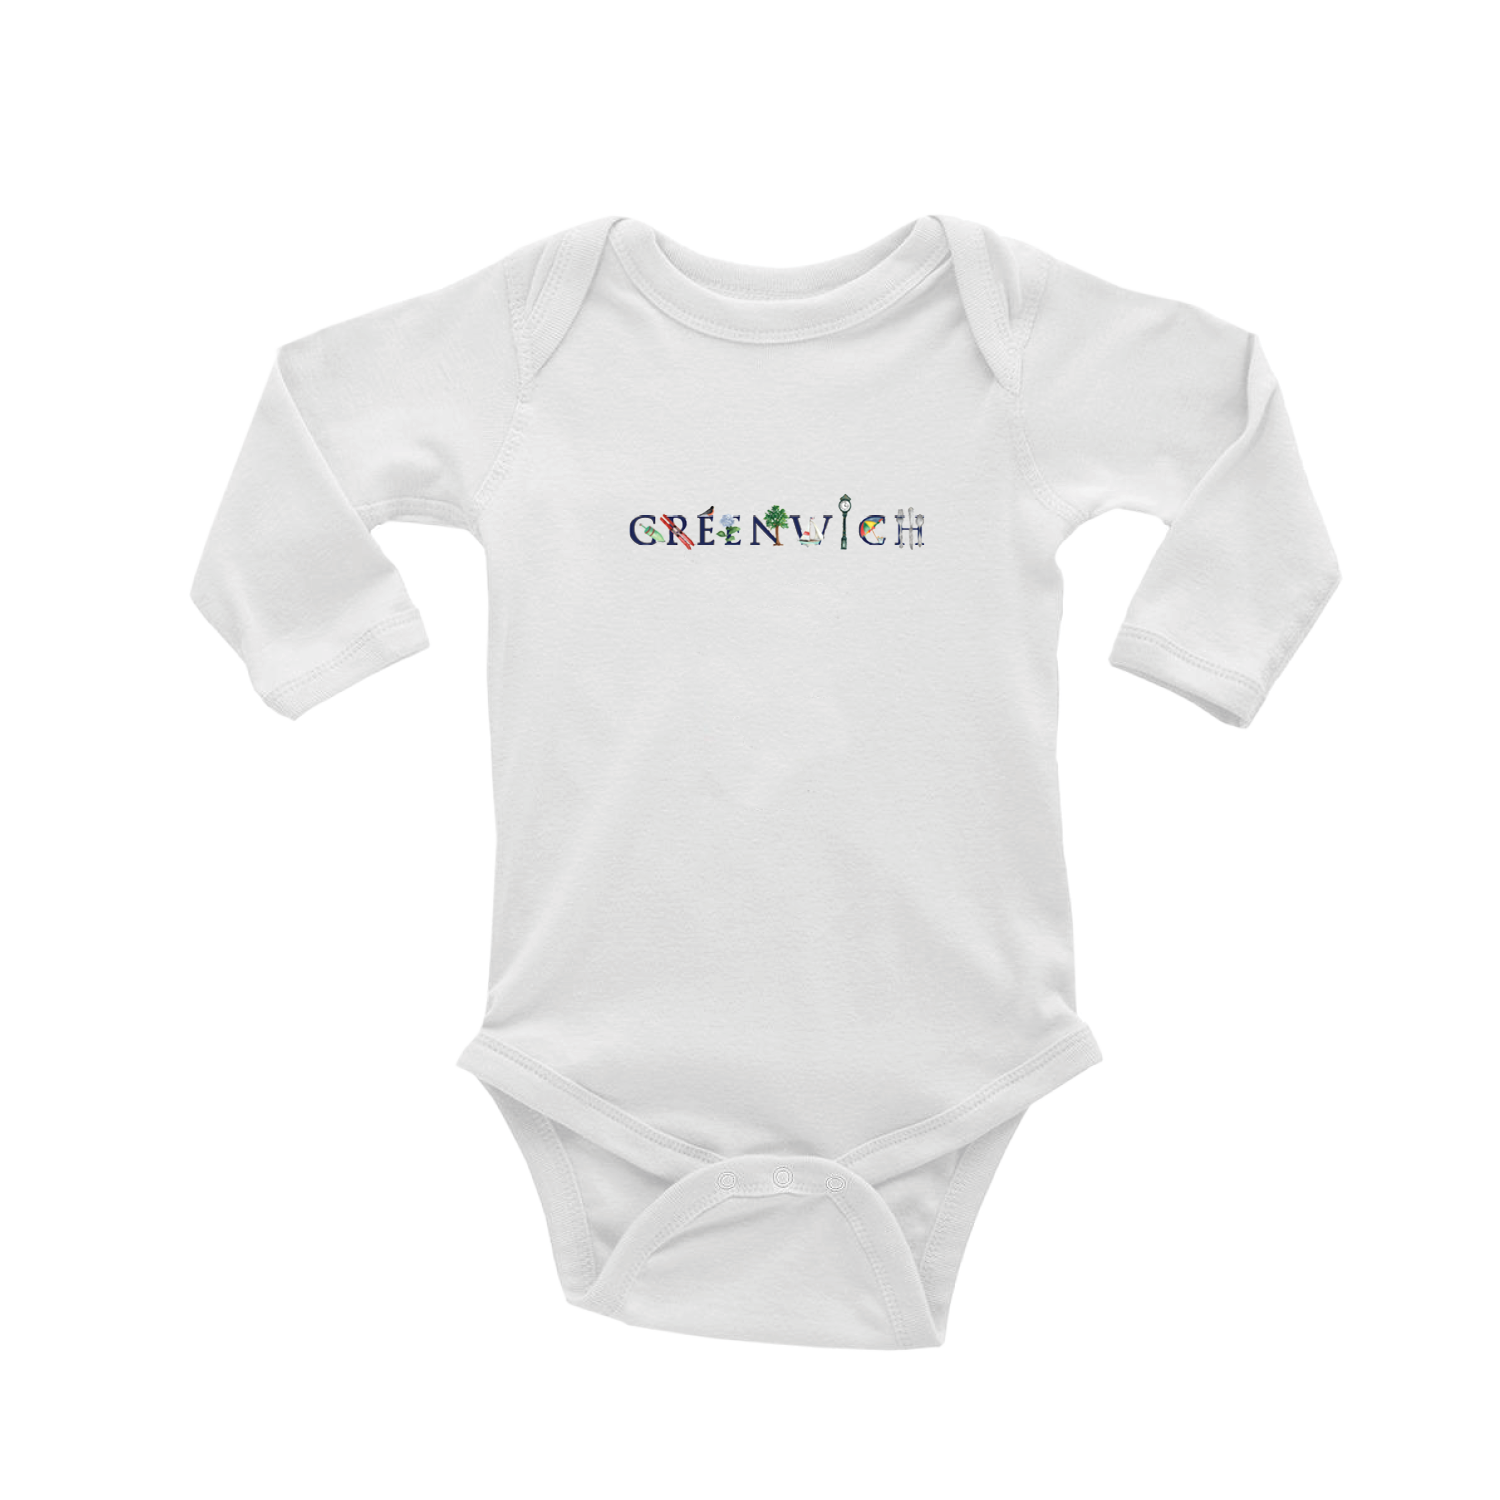 greenwich baby snap up long sleeve